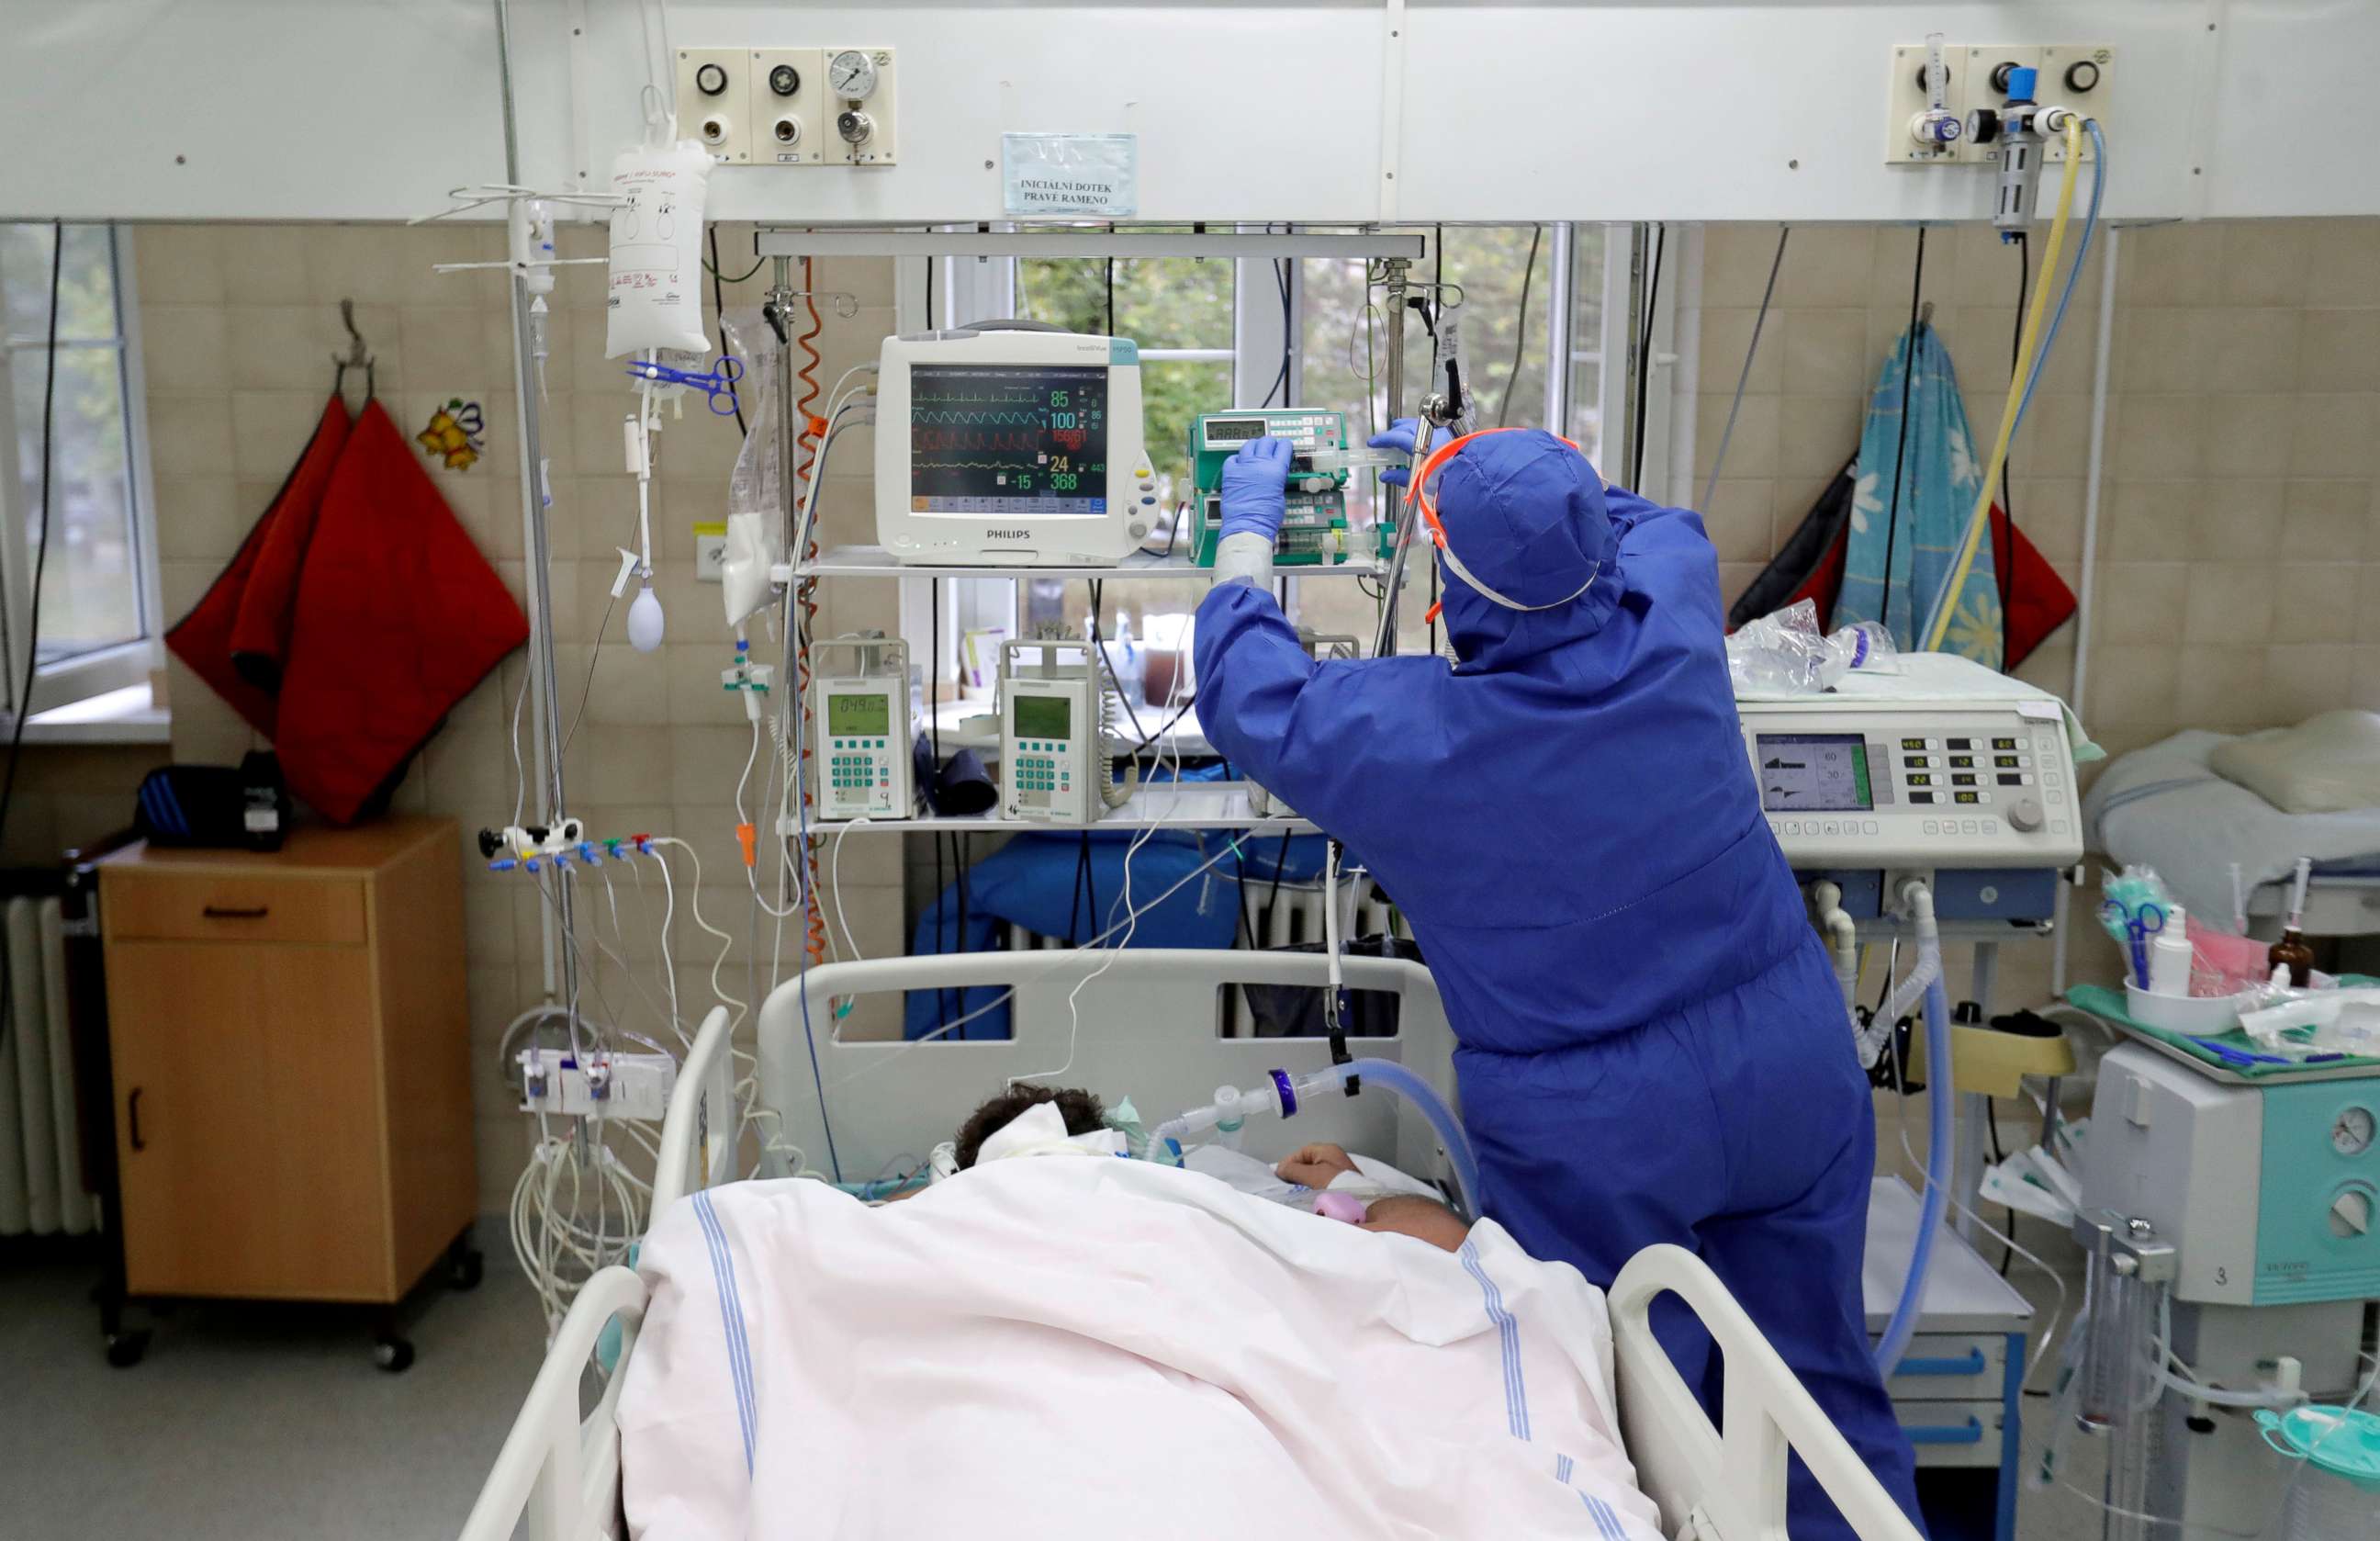 PHOTO: A member of the medical staff treats a patient suffering from COVID-19 at the intensive care unit of the Slany Hospital in Slany, Czech Republic, Oct. 13, 2020. 